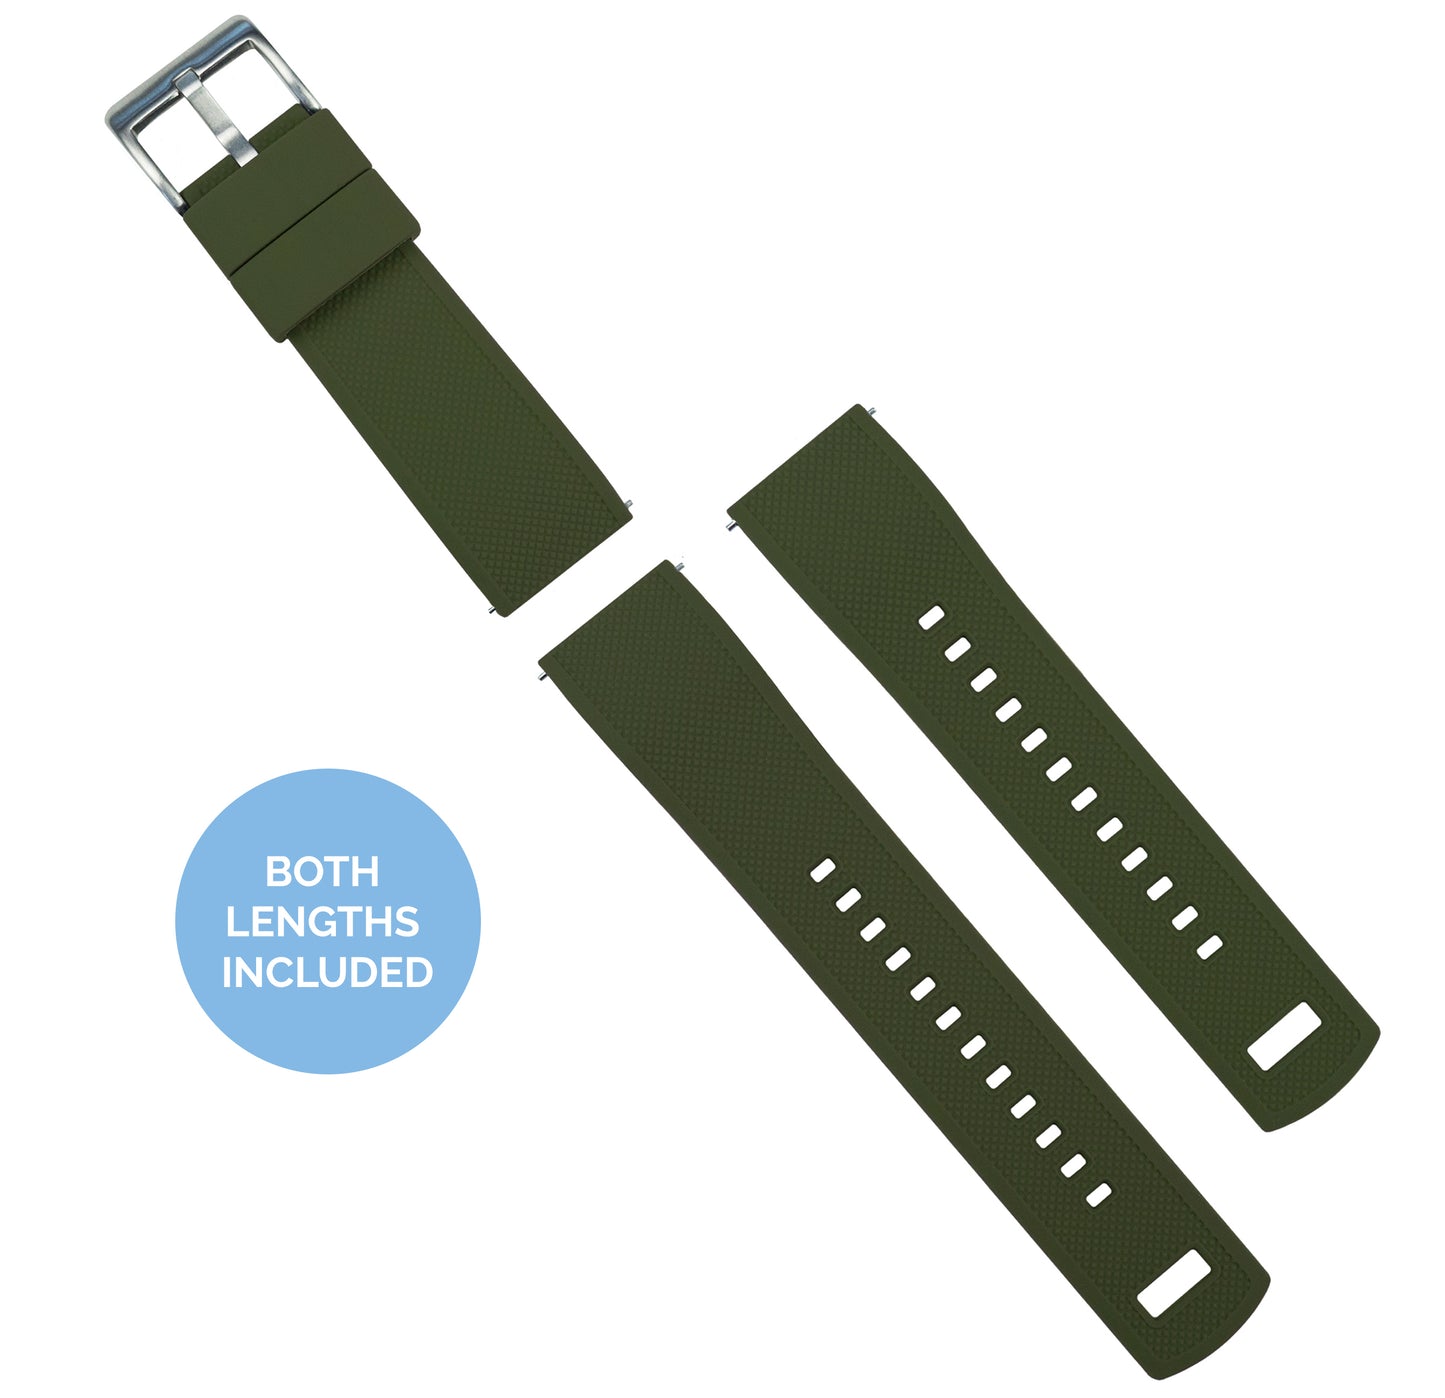 Fossil Sport | Elite Silicone | Army Green Top / Black Bottom - Barton Watch Bands